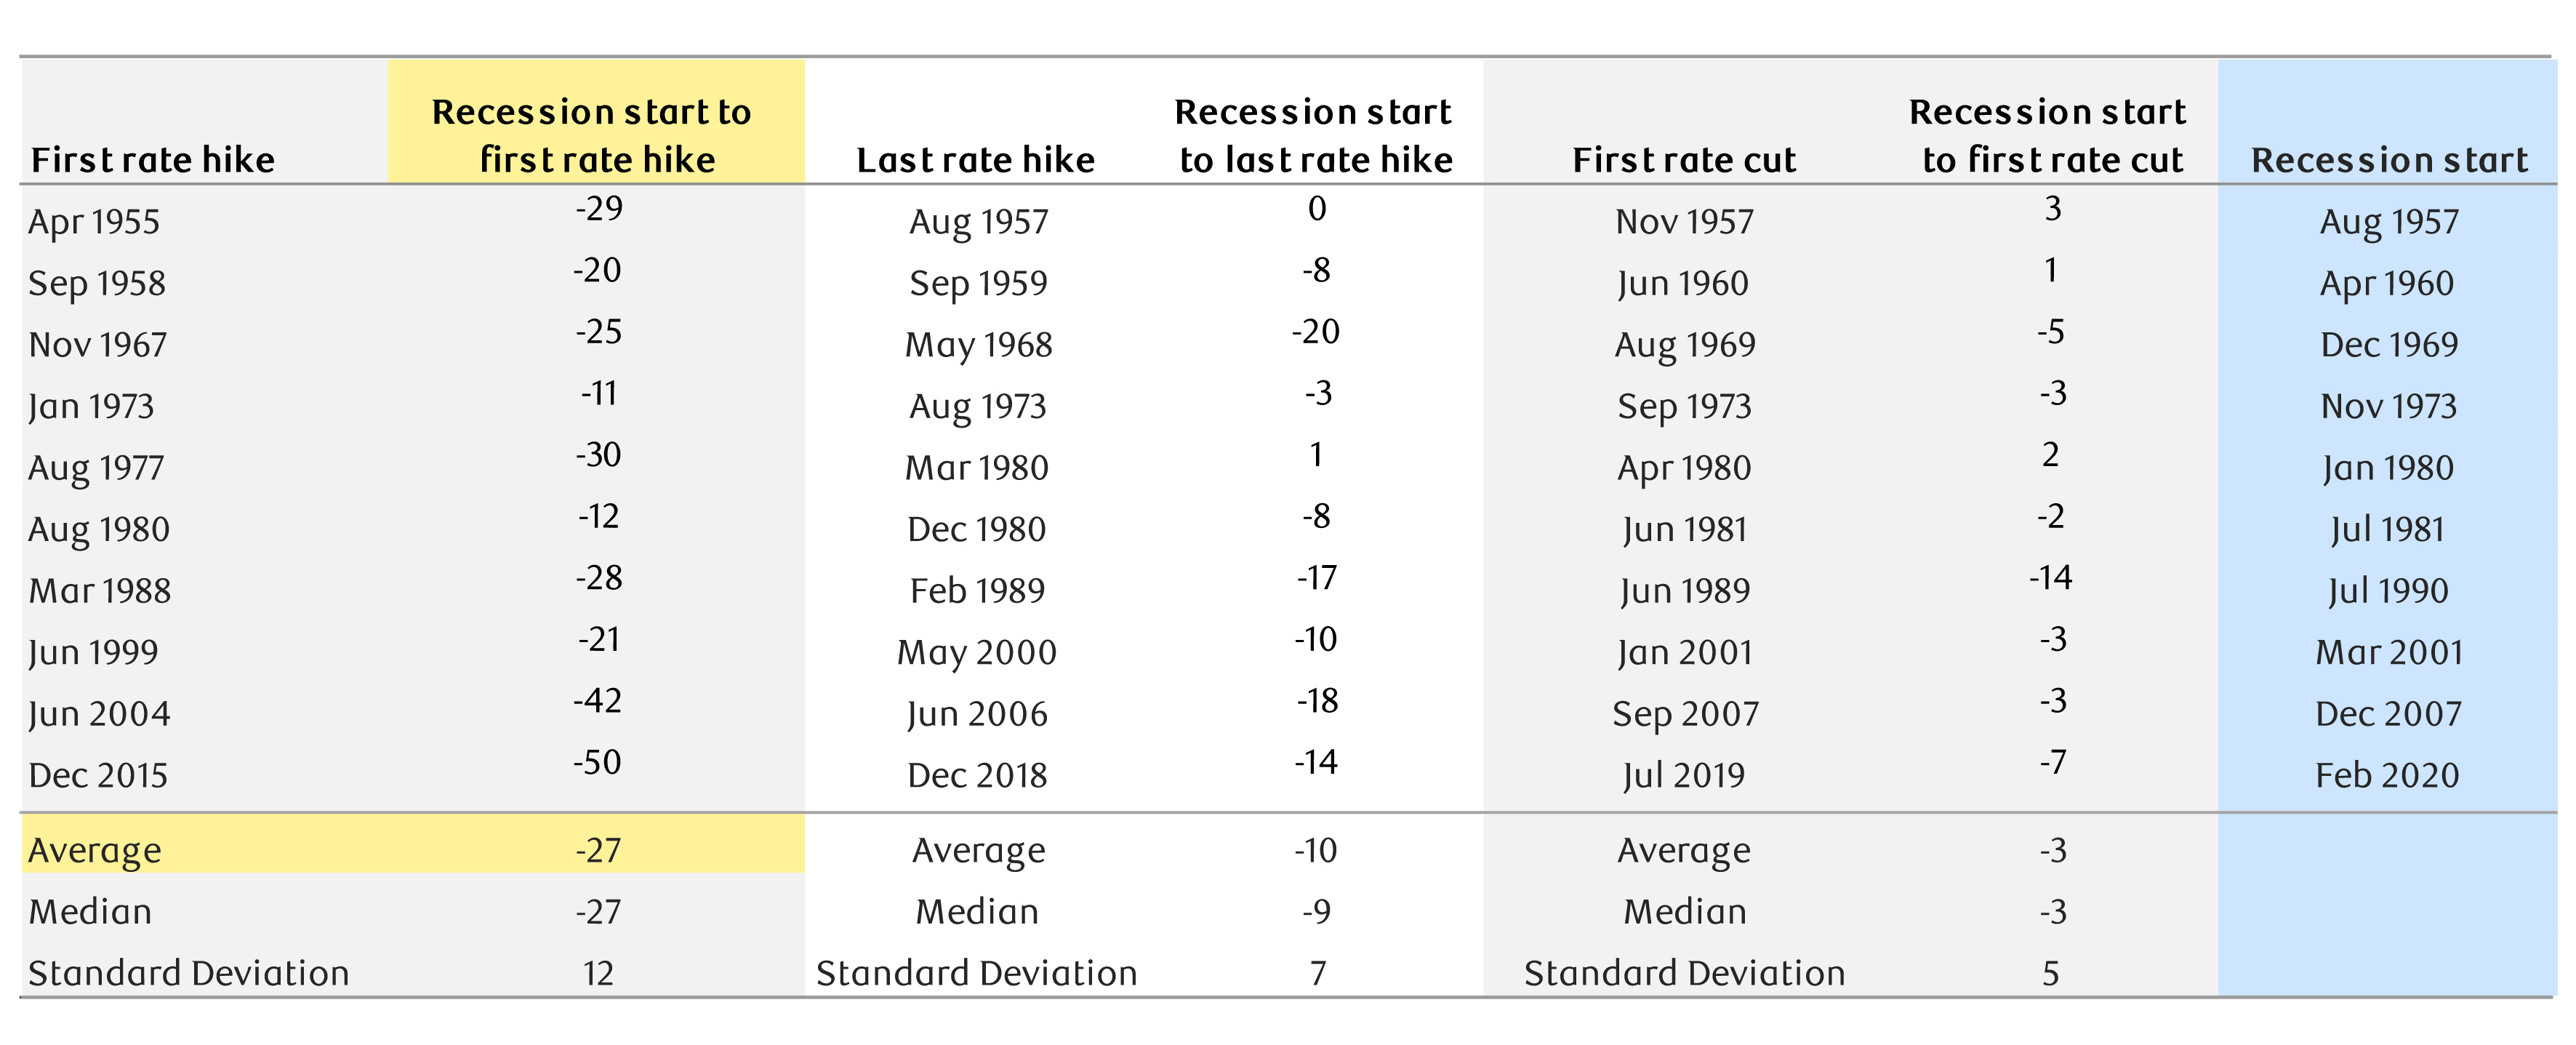 Historically, recessions come with a long lag after tightening